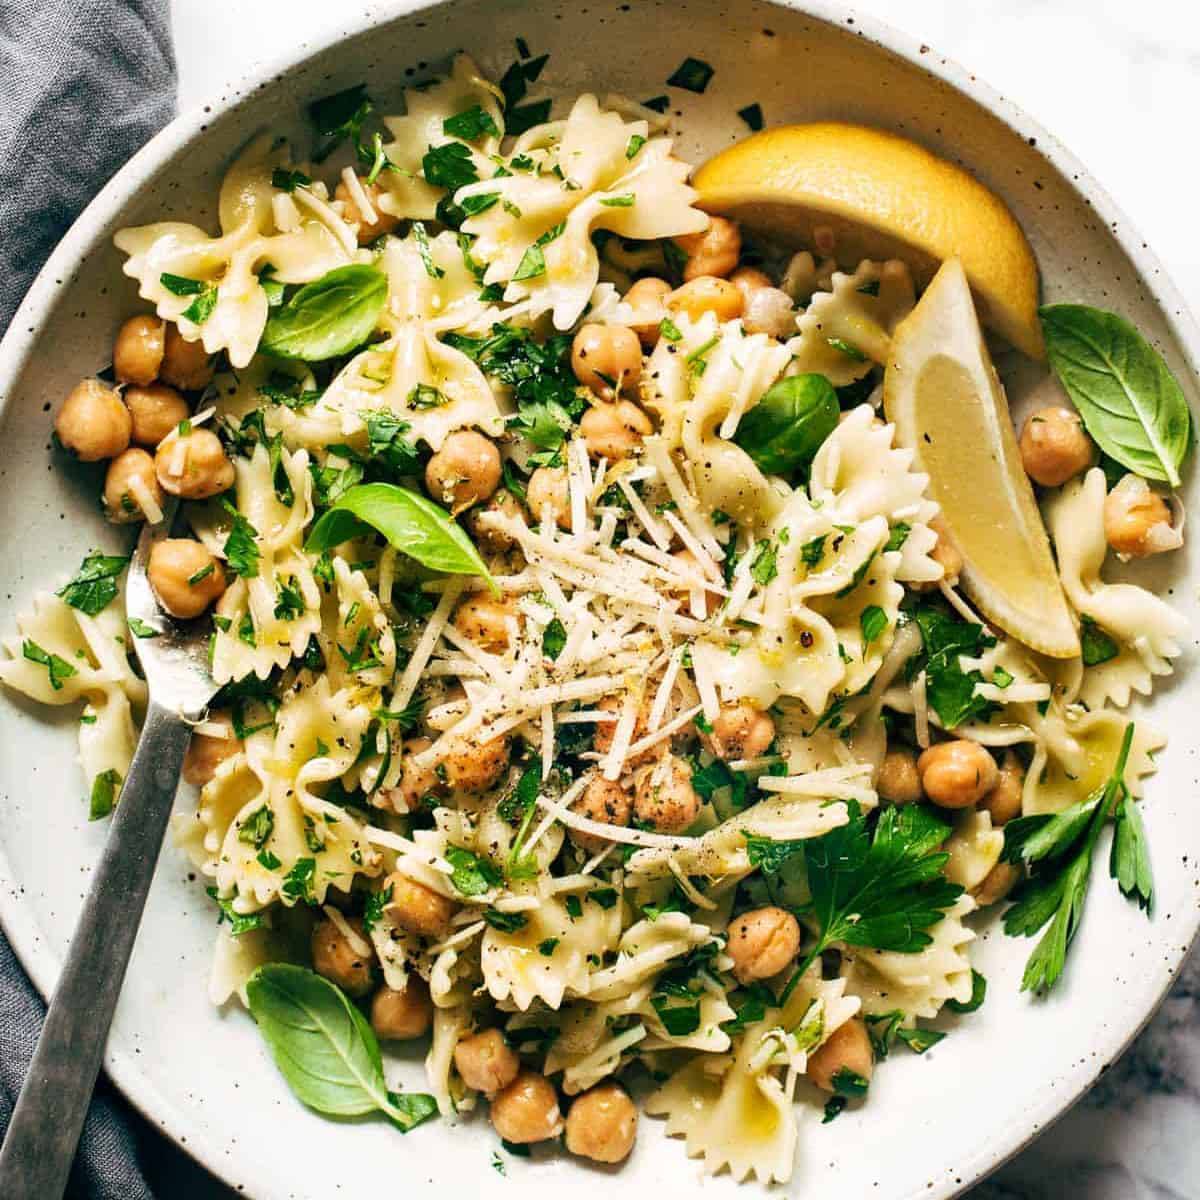 Pasta tossed with greens and cheese with lemon wedges.